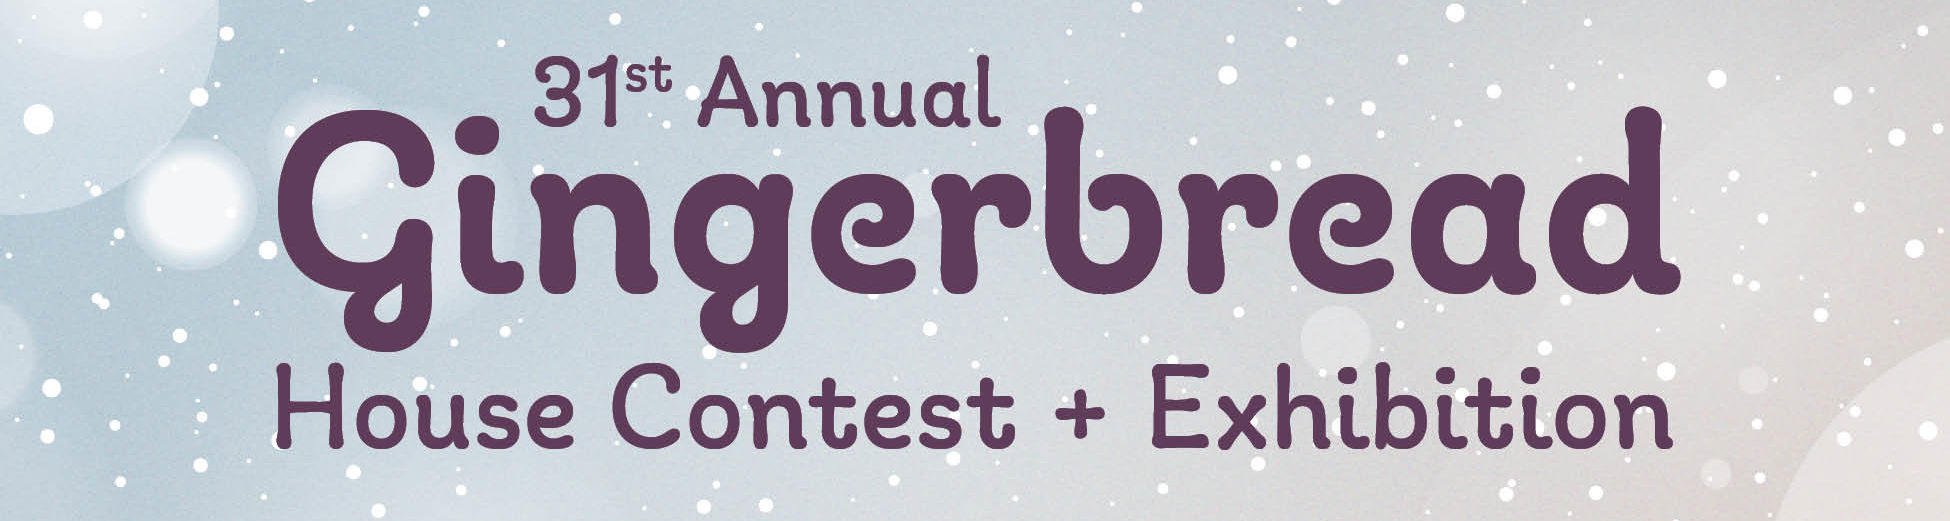 31st Annual Gingerbread House Contest & Exhibition